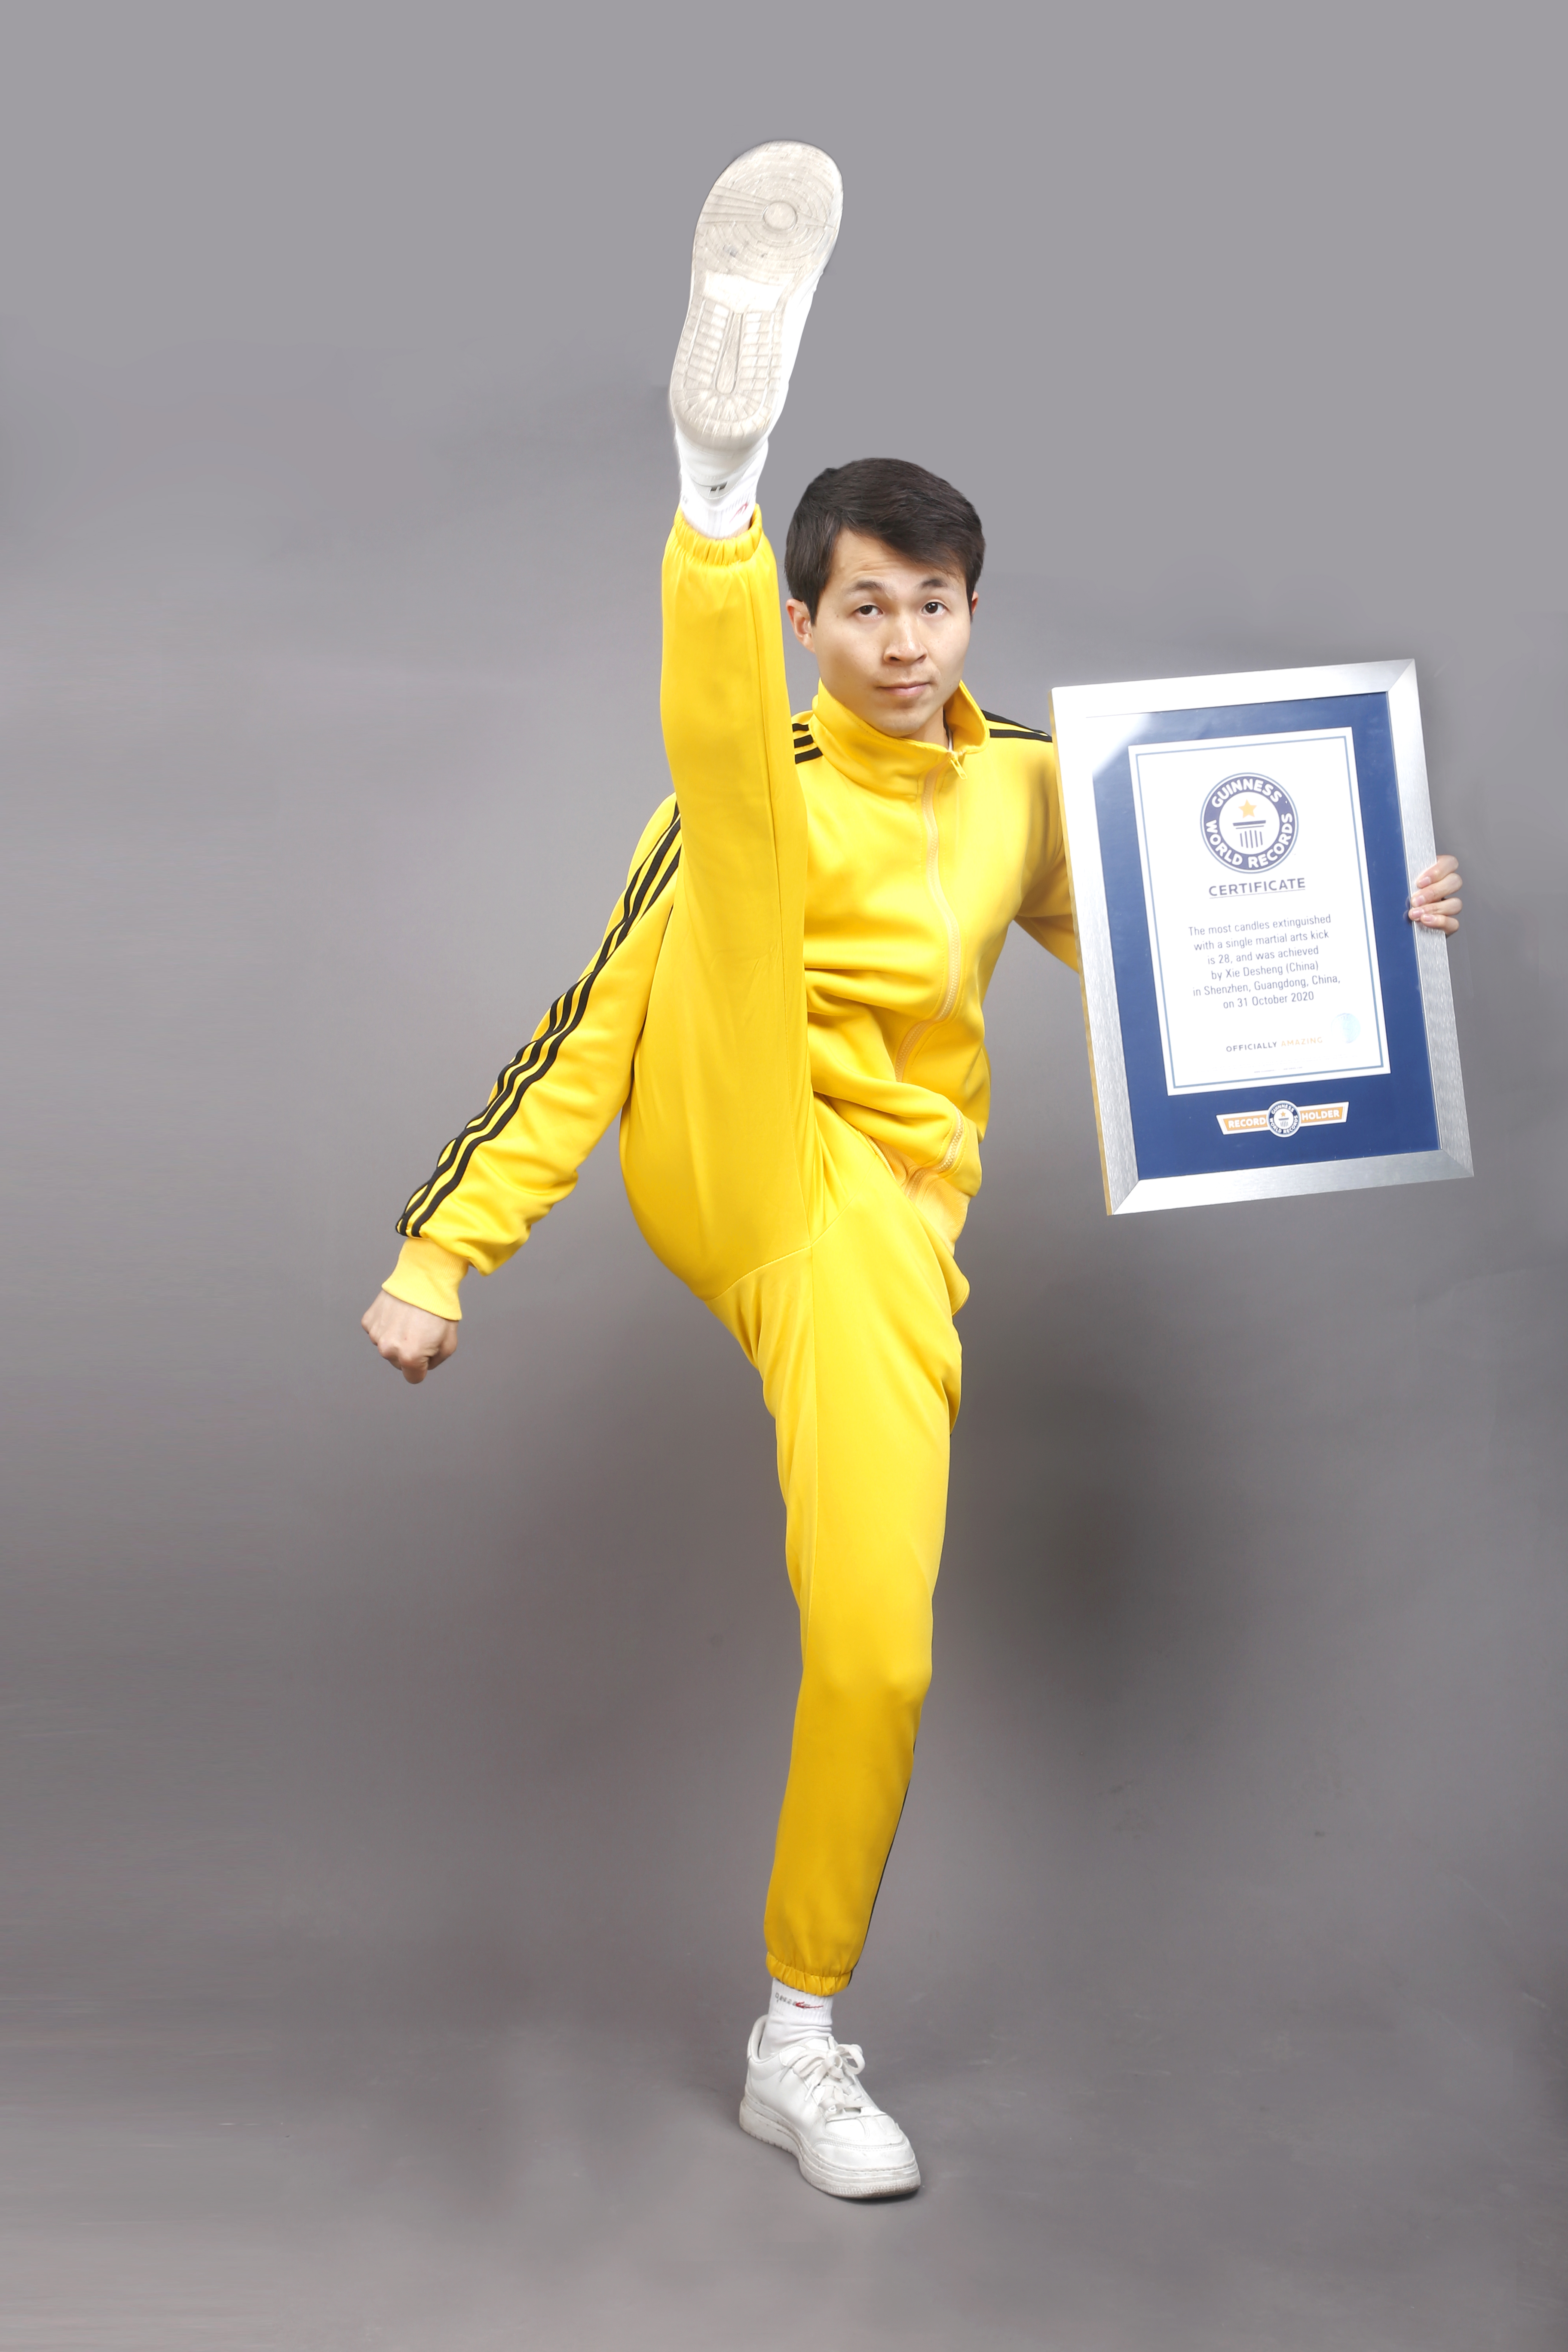 Bruce Lee-Inspired Martial Artist Can't Stop Breaking World Records